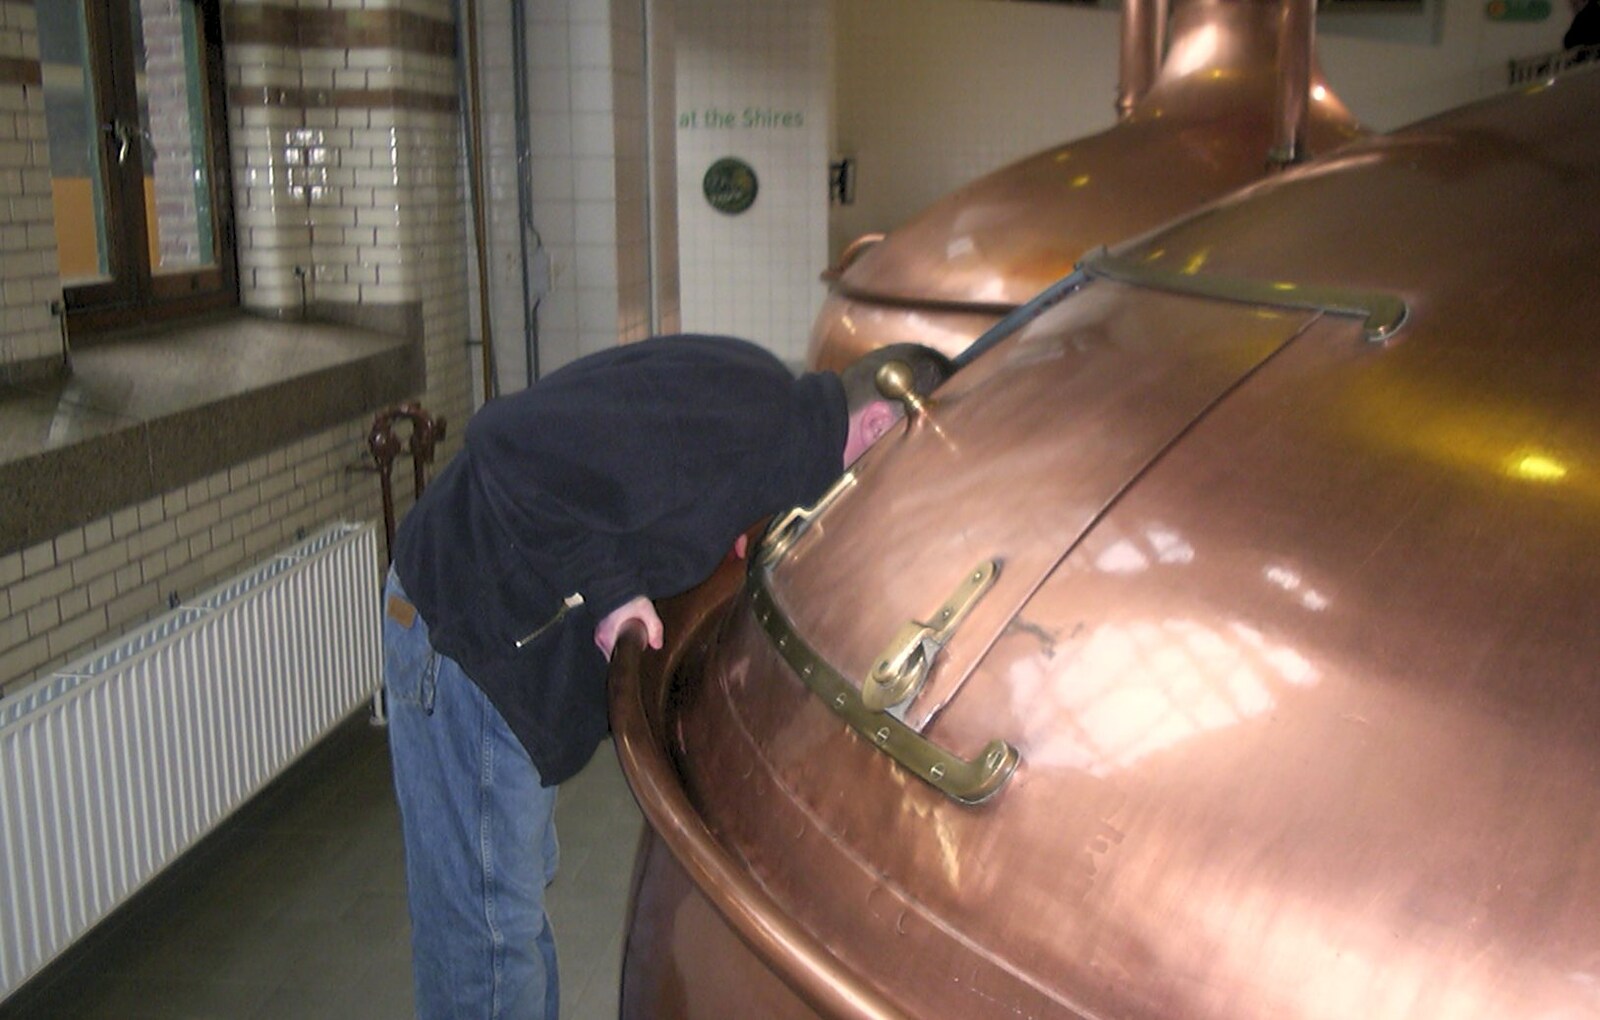 The Boy Phil sticks his head in a copper fermenter from Anne Frank, Markets and Mikey-P's Stag Do, Amsterdam, Netherlands - 6th March 2004